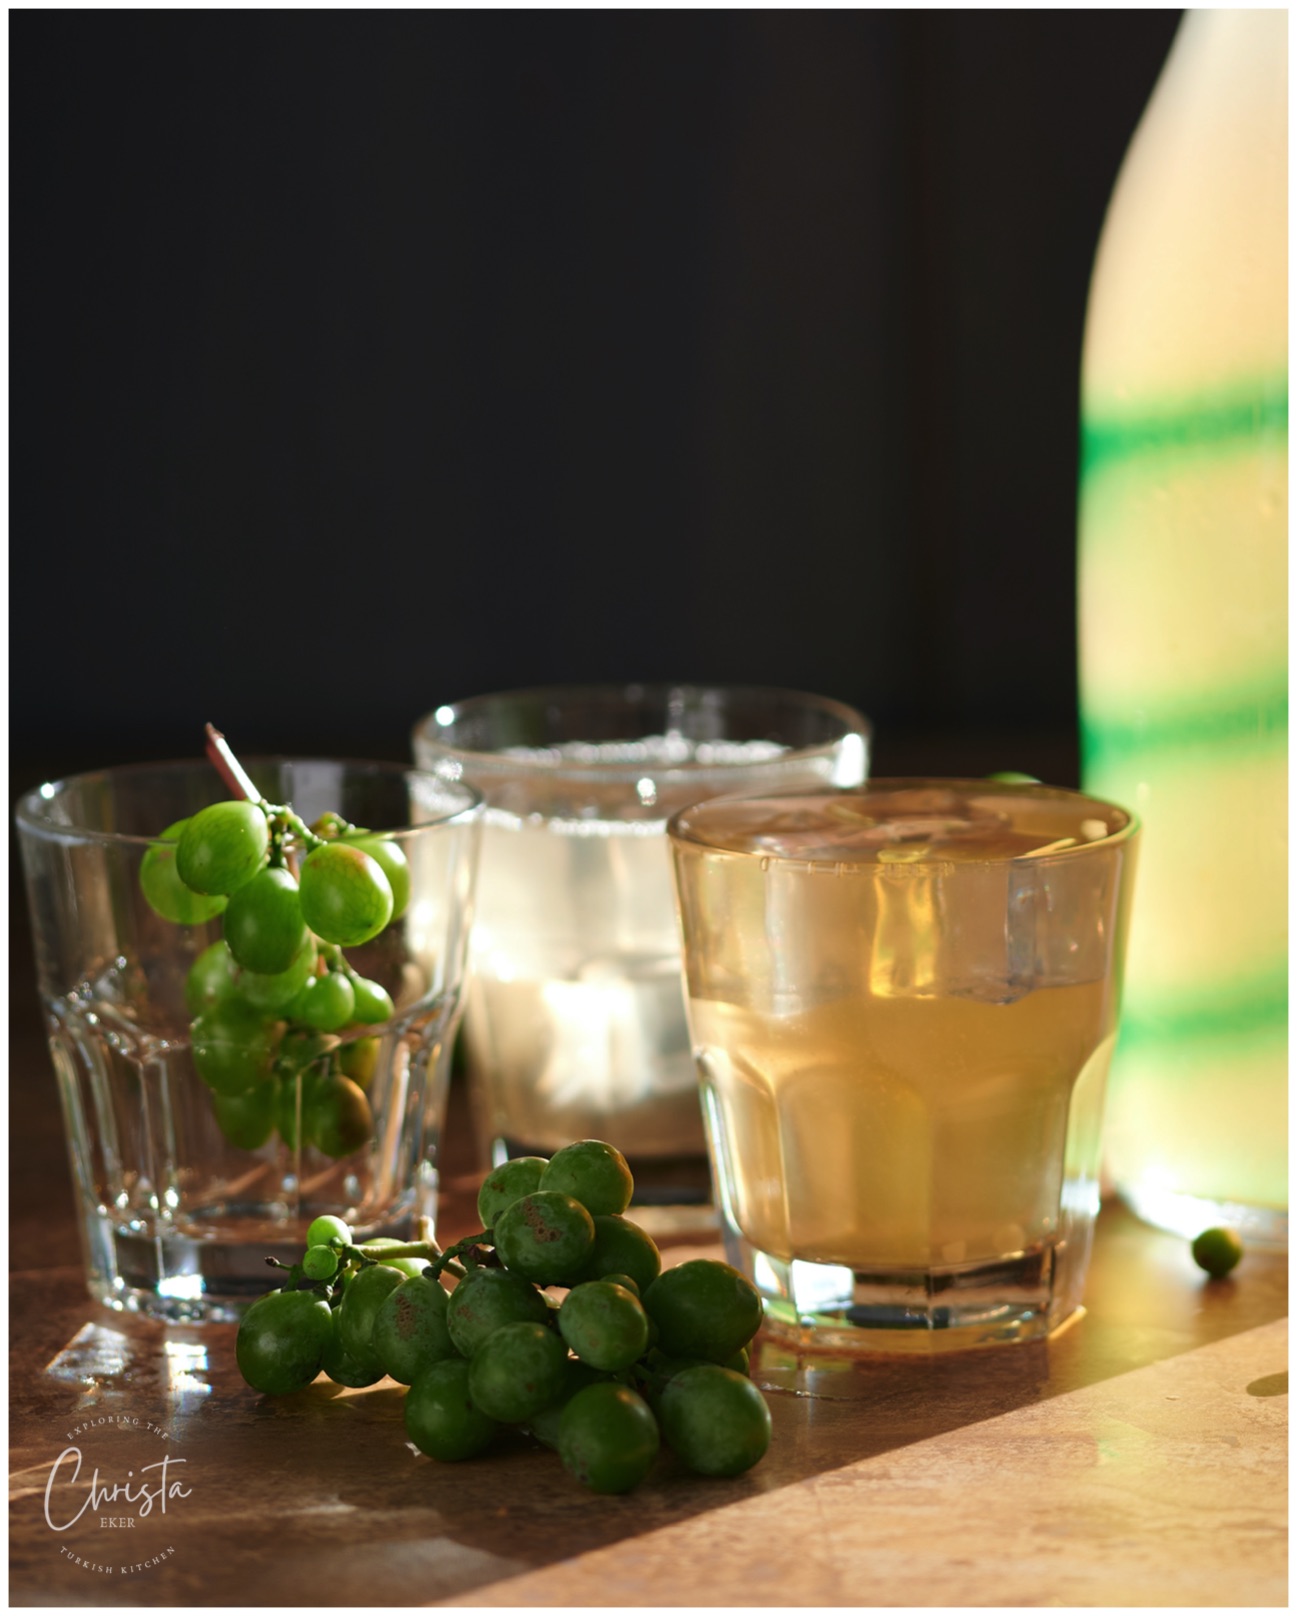 Picture shows a bottle of homemade koruk drink Turkish Koruk şerbeti and glasses of juice and one filled with unripe grapes.